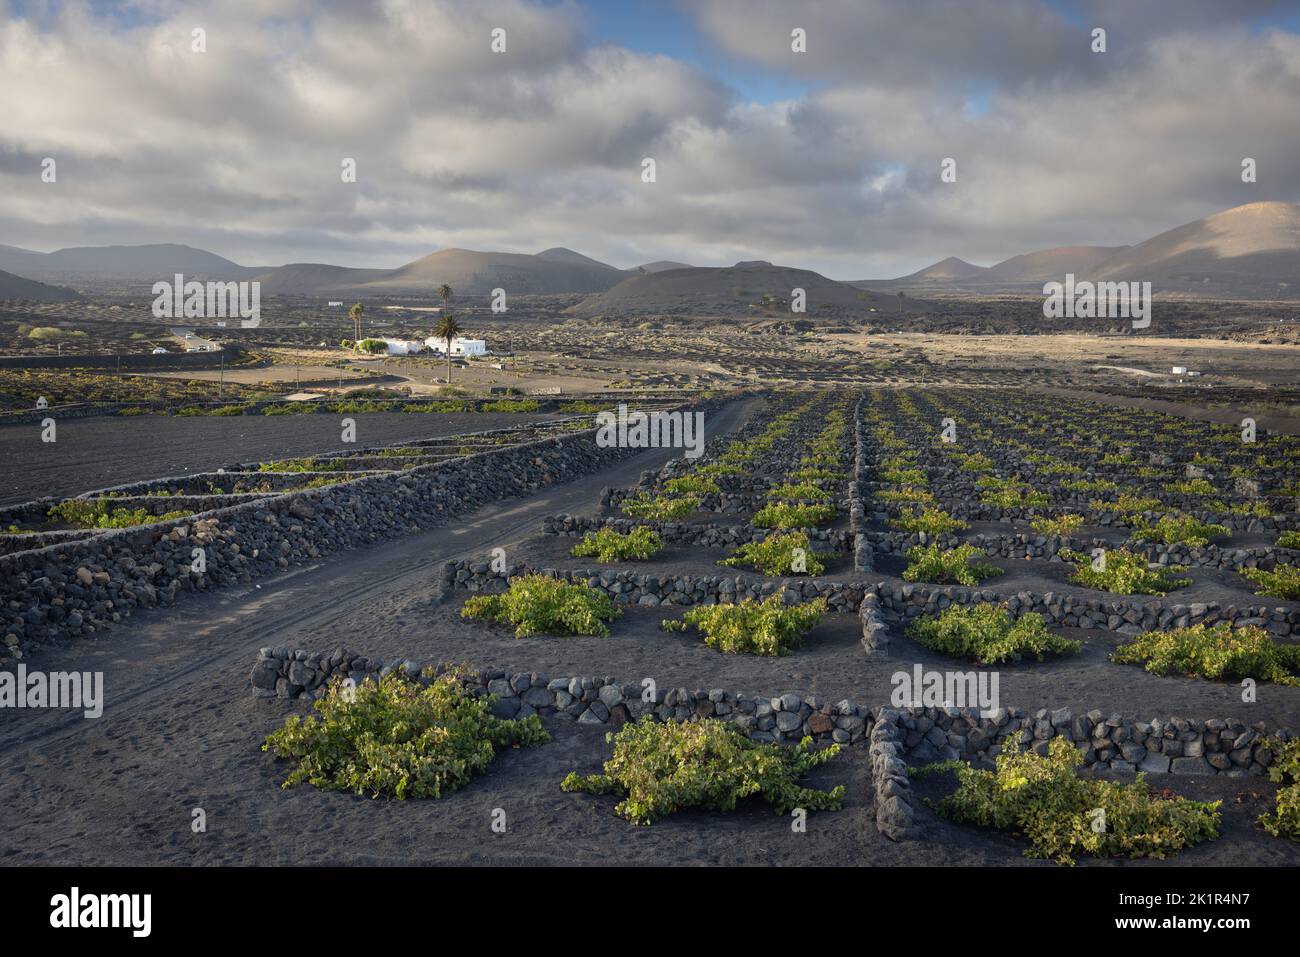 Typical vineyard in the La Geria region on the island Lanzarote protecting the grapevines against the heavy winds by building walls out of lava stones Stock Photo